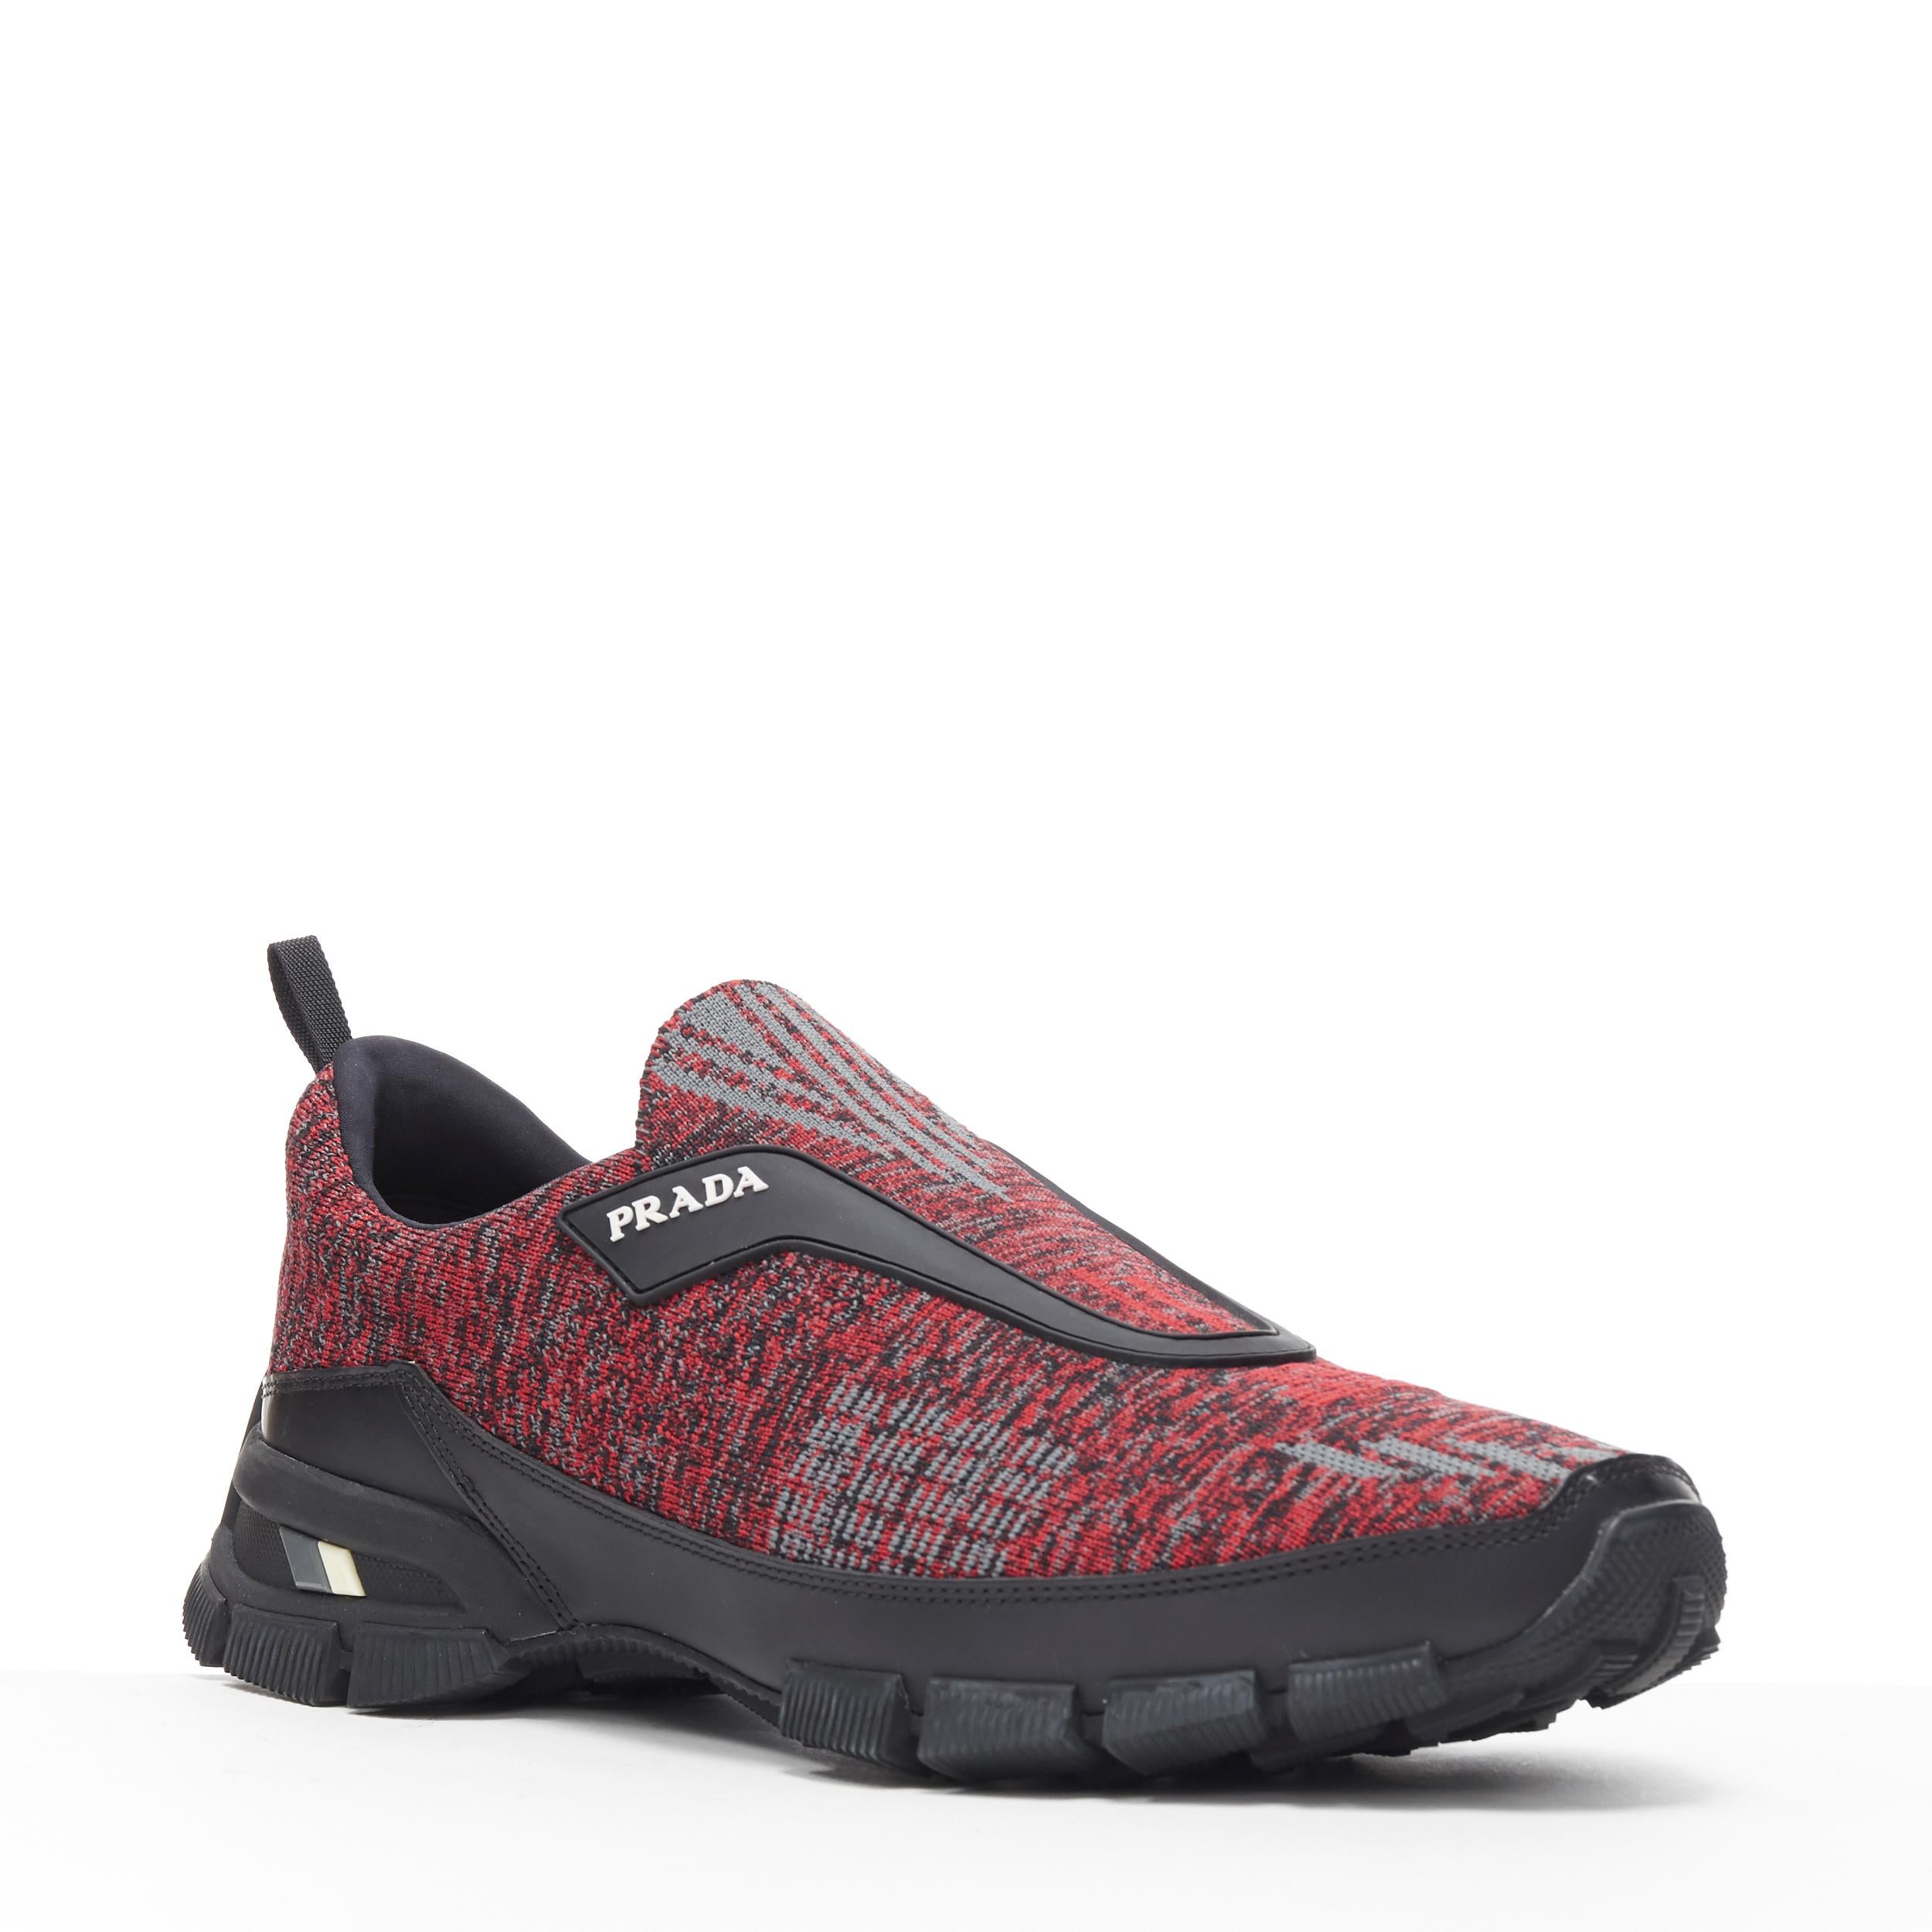 new PRADA Crossection Knit Low red black sock low runner sneakers UK8 EU41
Brand: Prada
Designer: Miuccia Prada
Model Name / Style: Crossection Knit
Material: Fabric, rubber
Color: Red, black
Pattern: Solid
Closure: Pull on
Extra Detail: Red grey